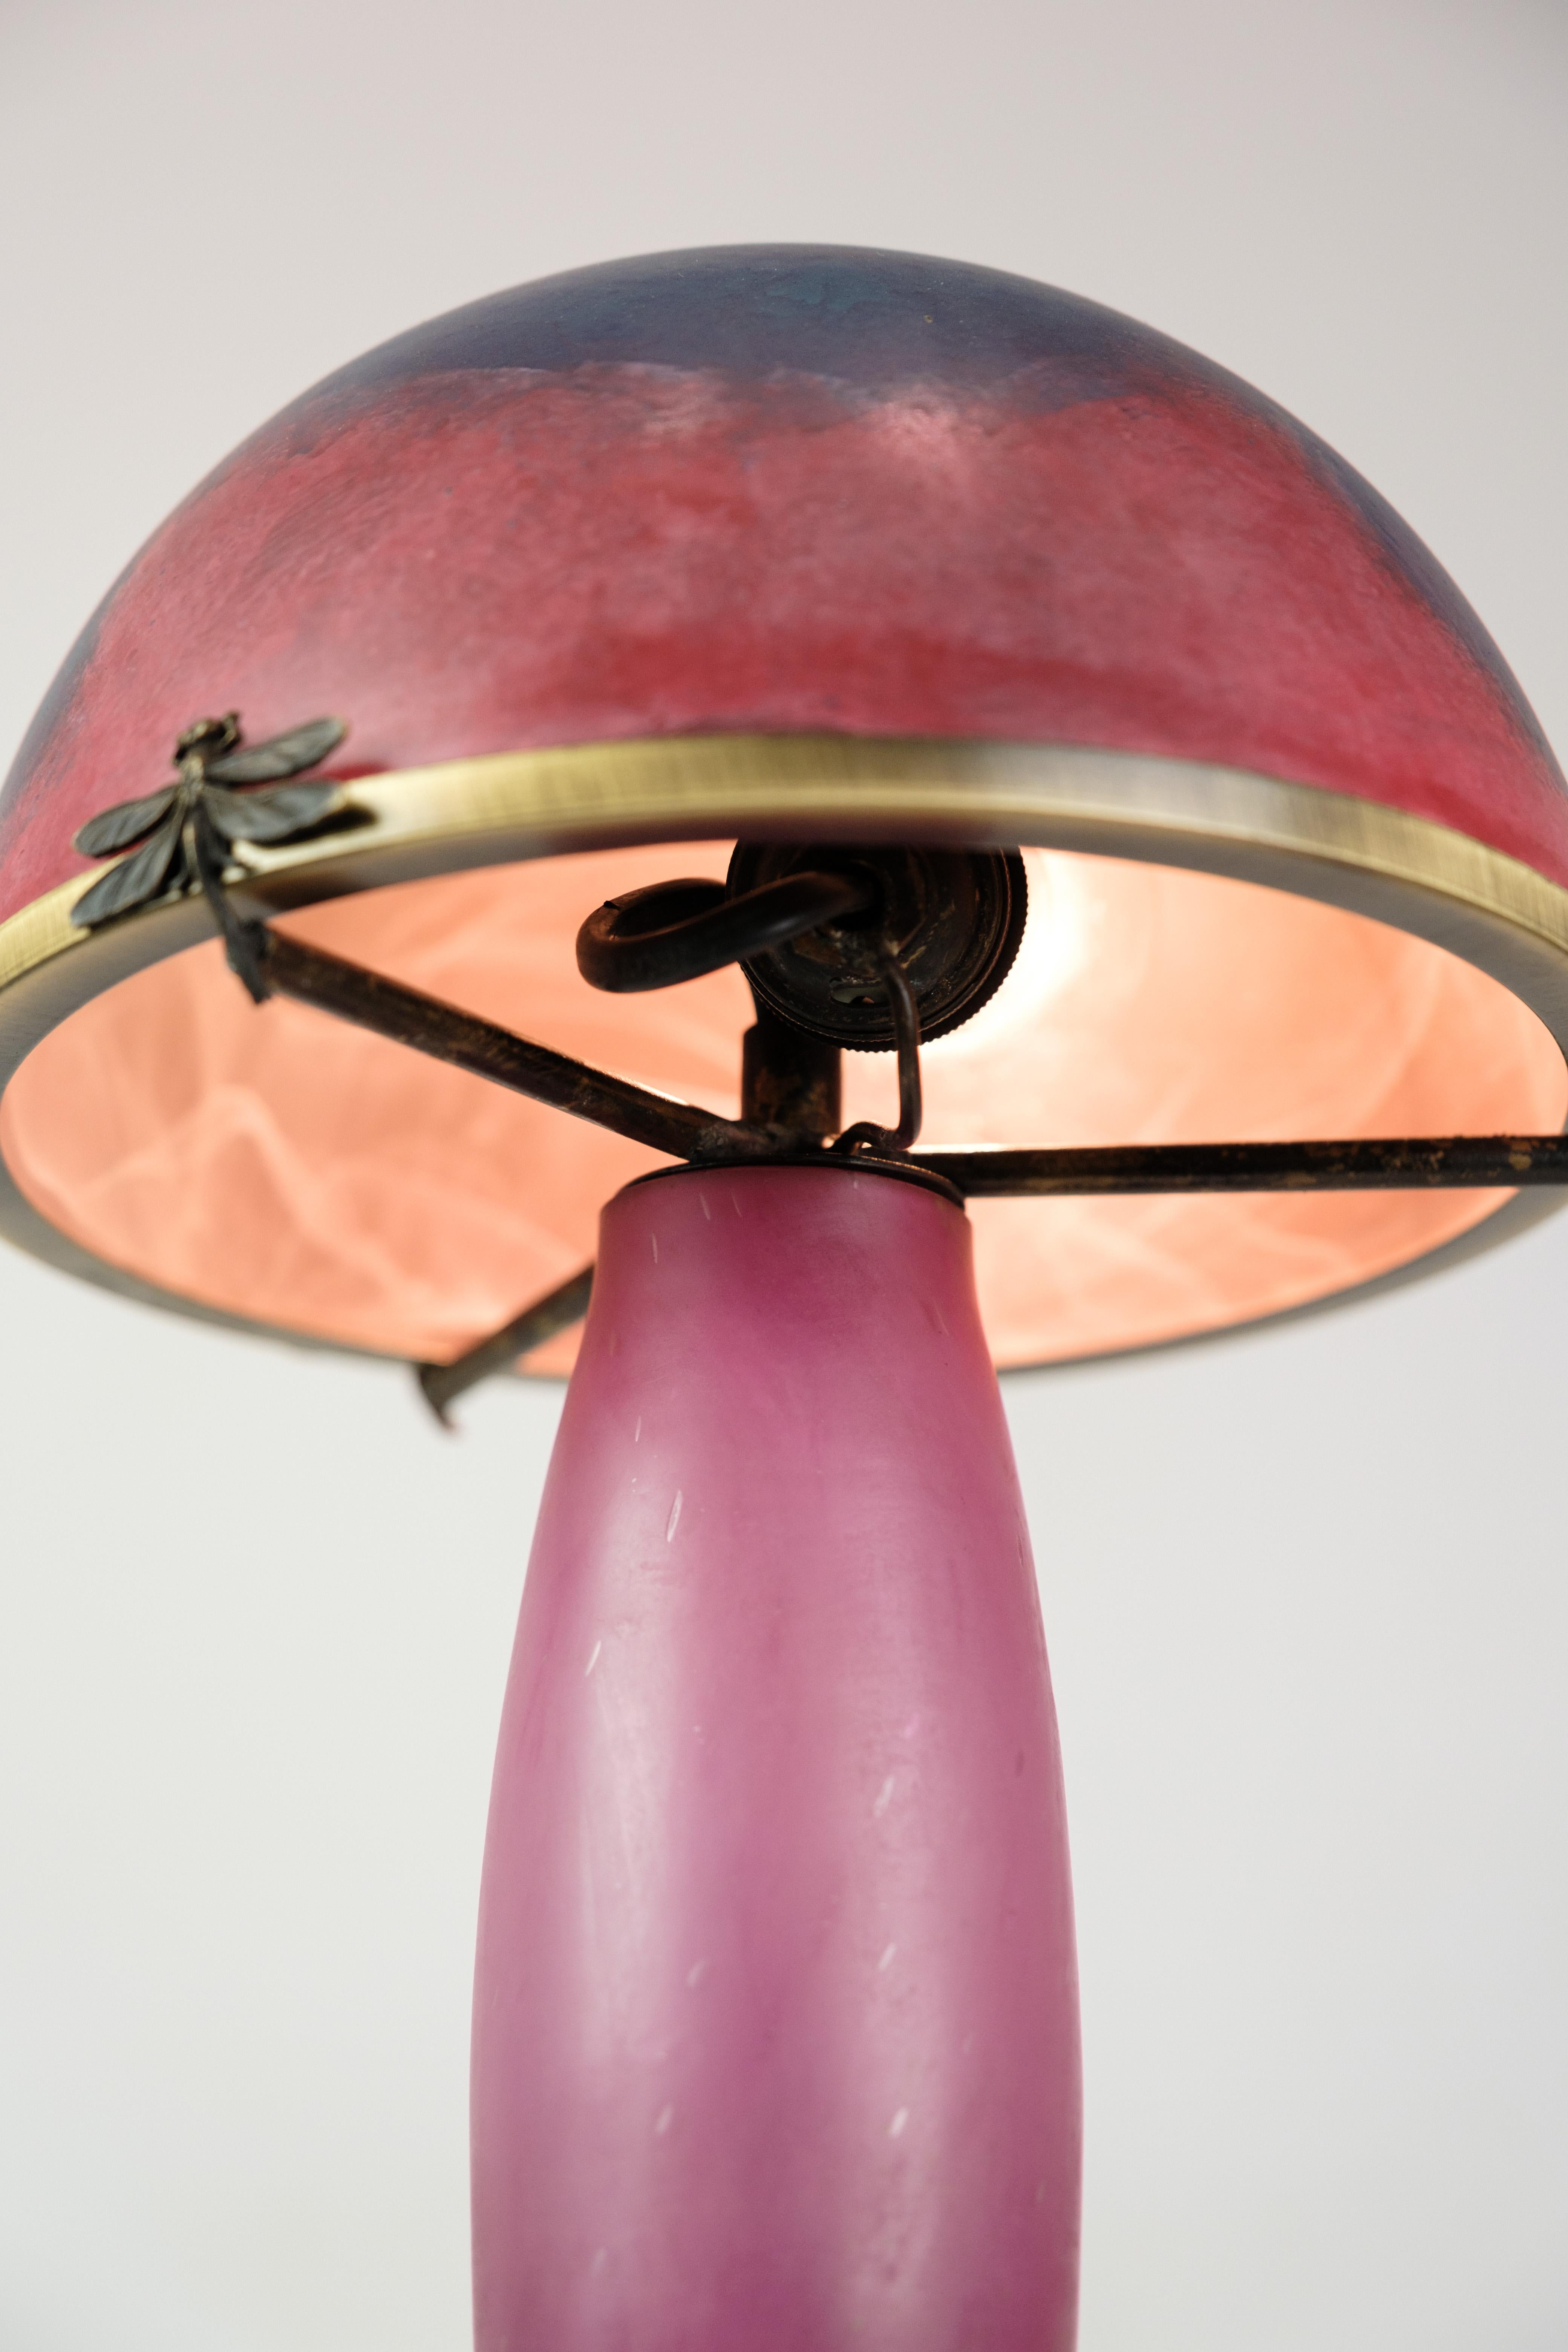 French Table Lamp in Dark Purple and Bordeaux Colors, Le Verre Francais, 1920s For Sale 1